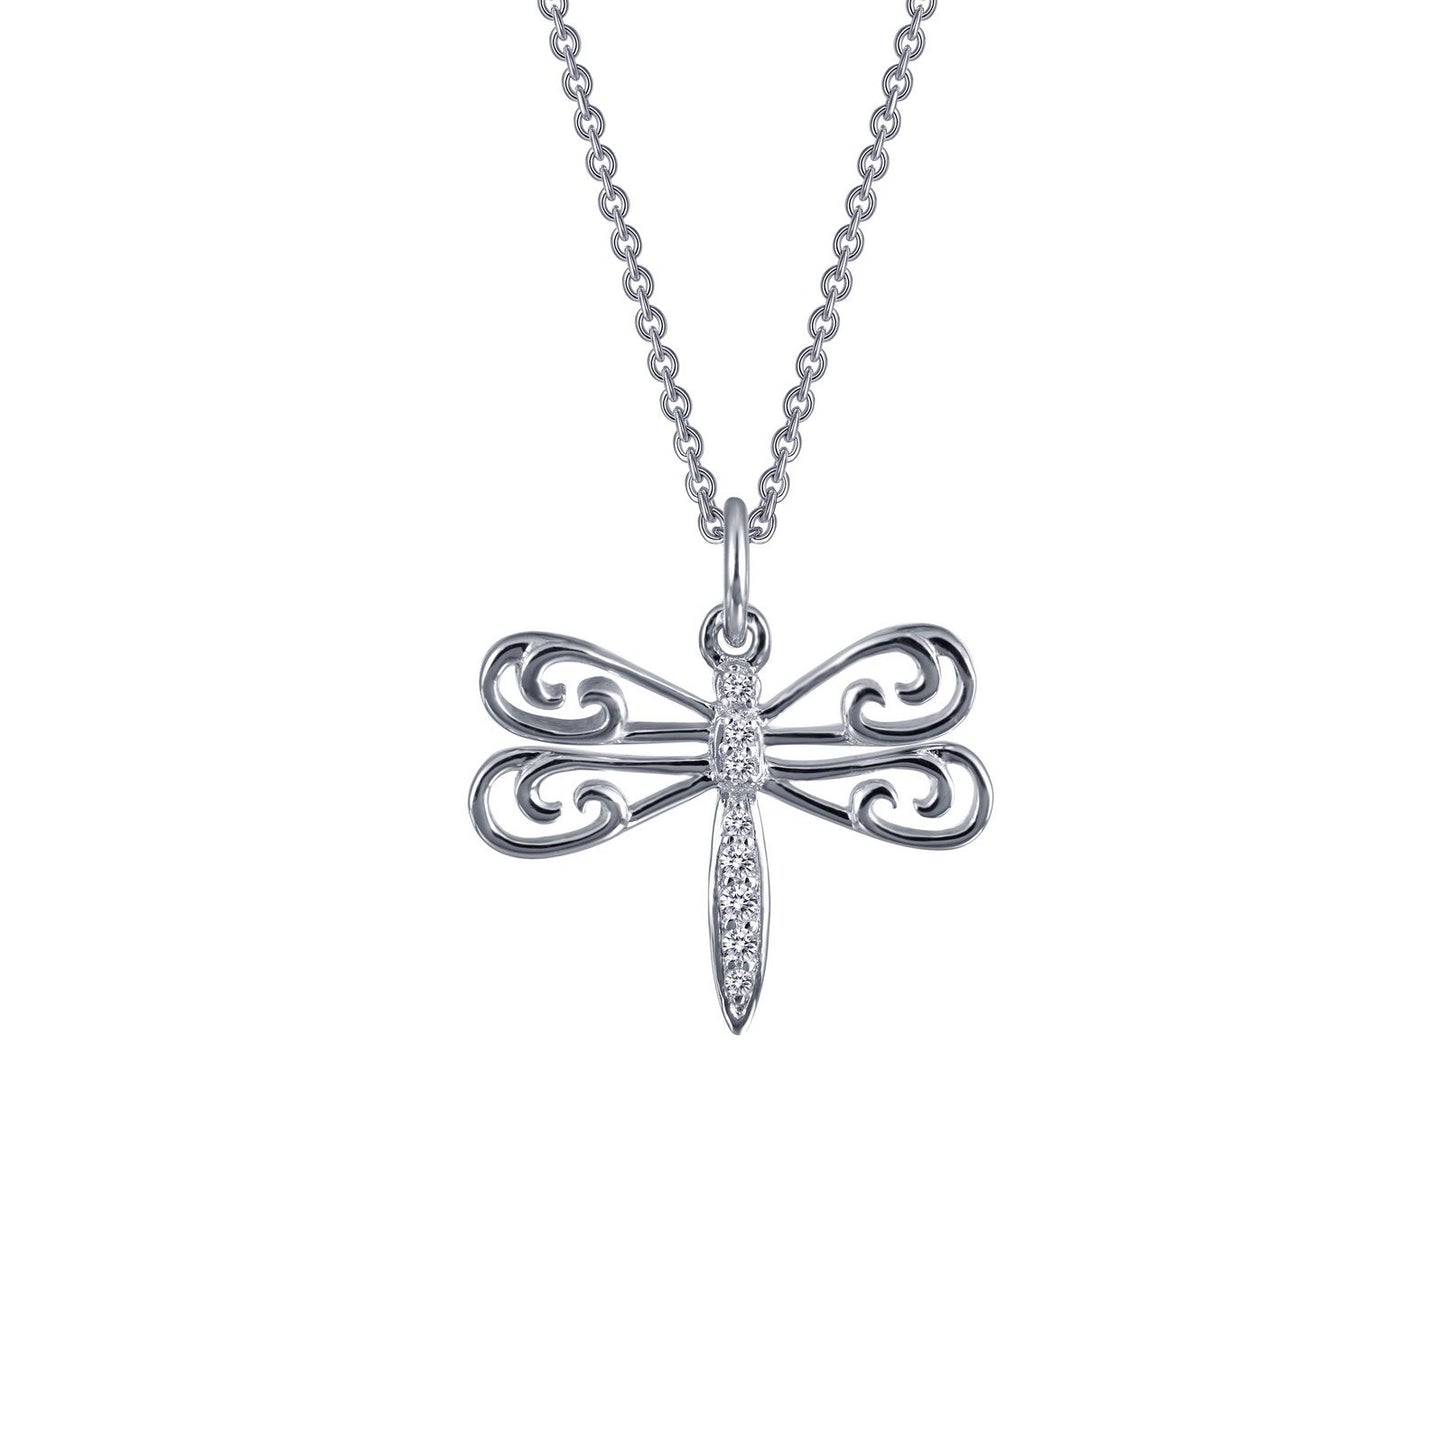 LaFonn Platinum Simulated Diamond N/A NECKLACES Dragonfly Pendant Necklace